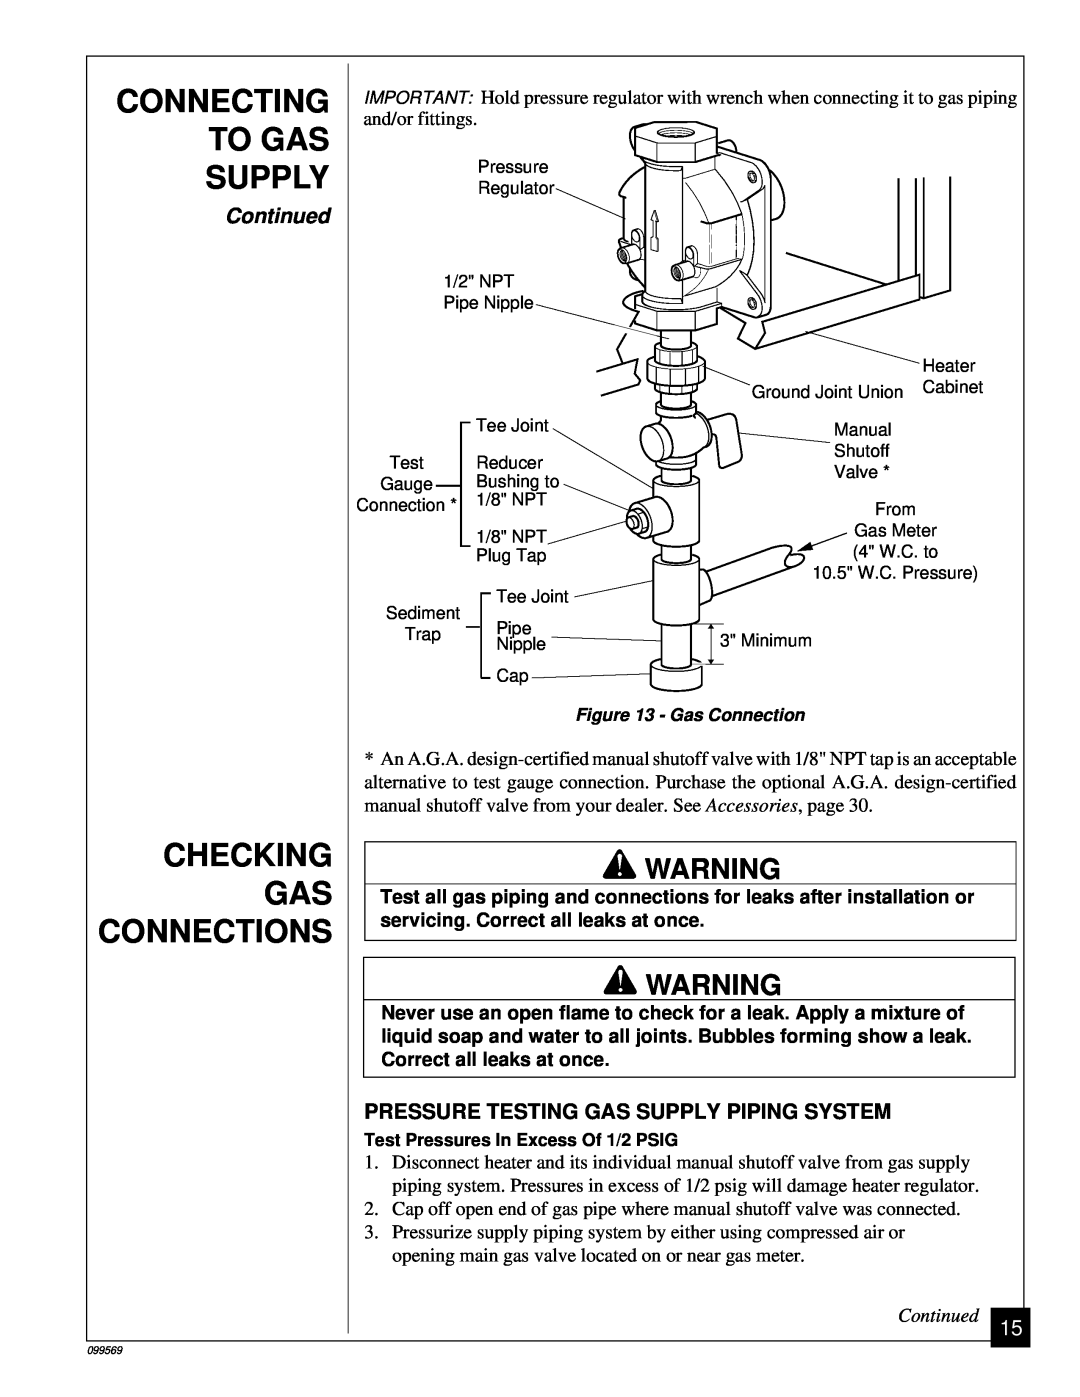 Desa A Checking, Connections, Connecting, To Gas, Supply, Continued, and/or fittings, servicing. Correct all leaks at once 